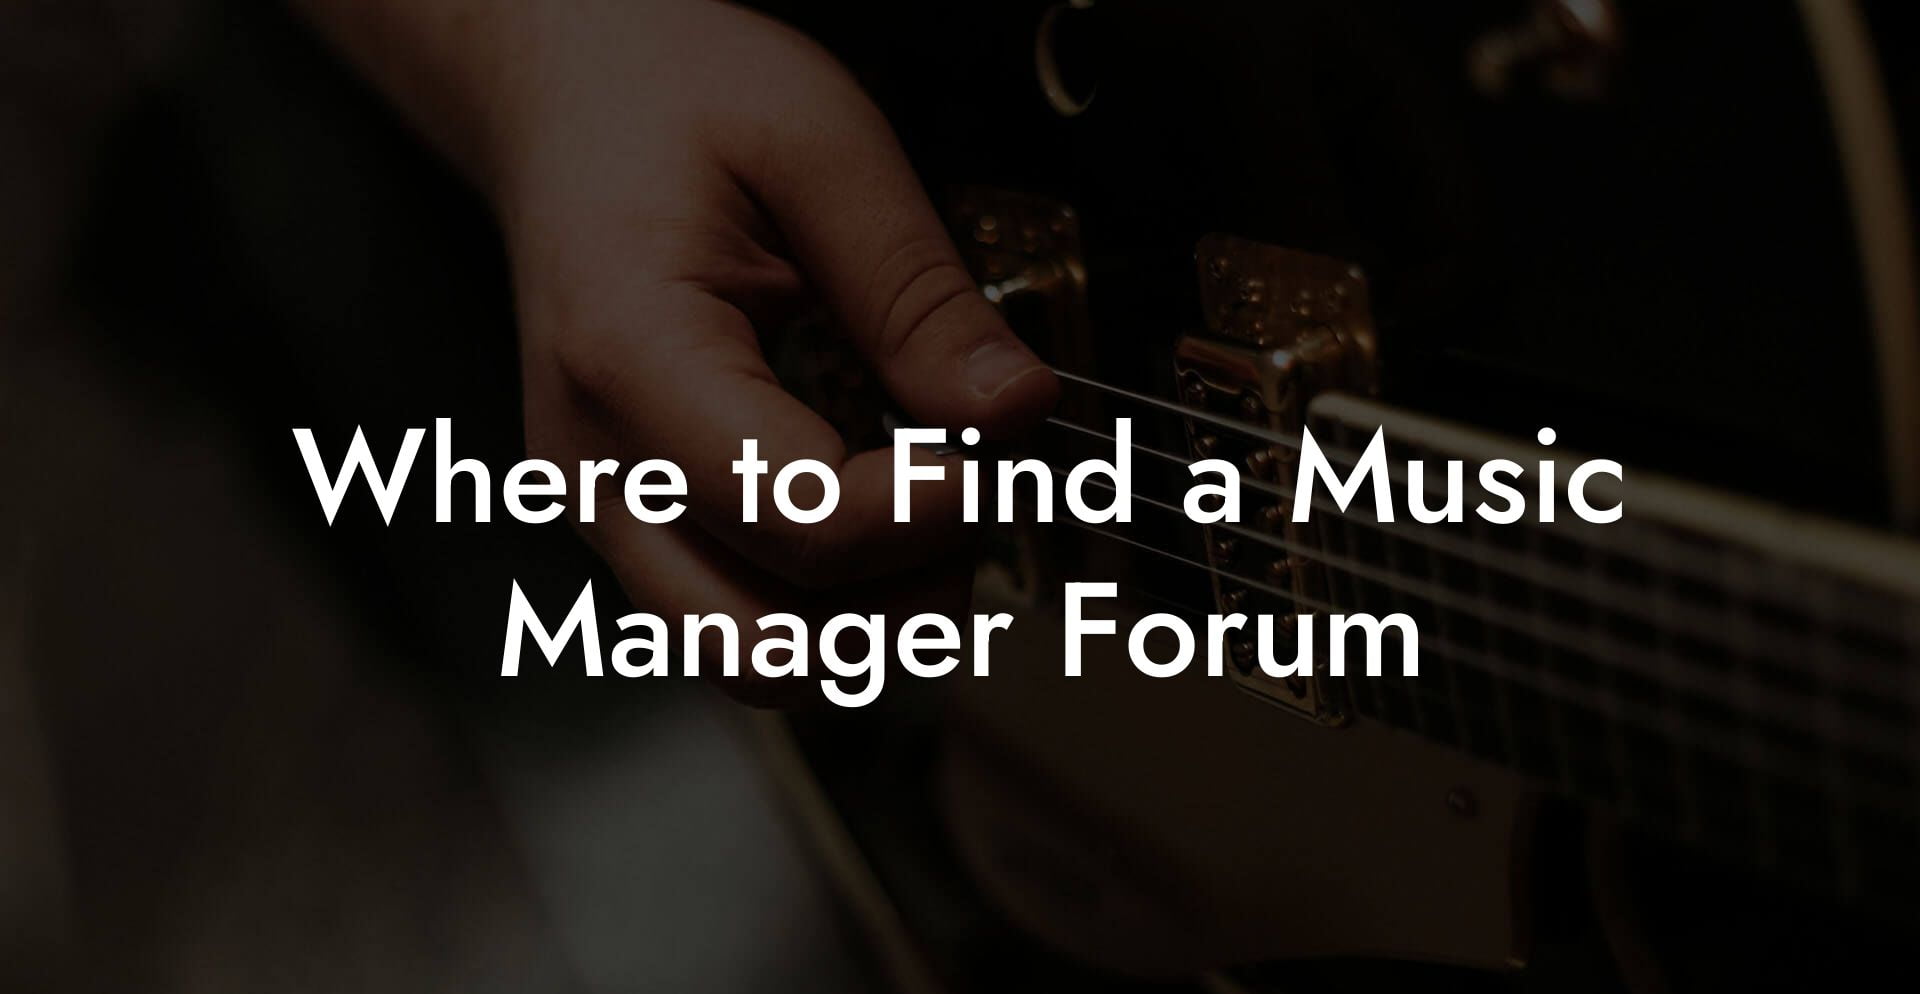 Where to Find a Music Manager Forum